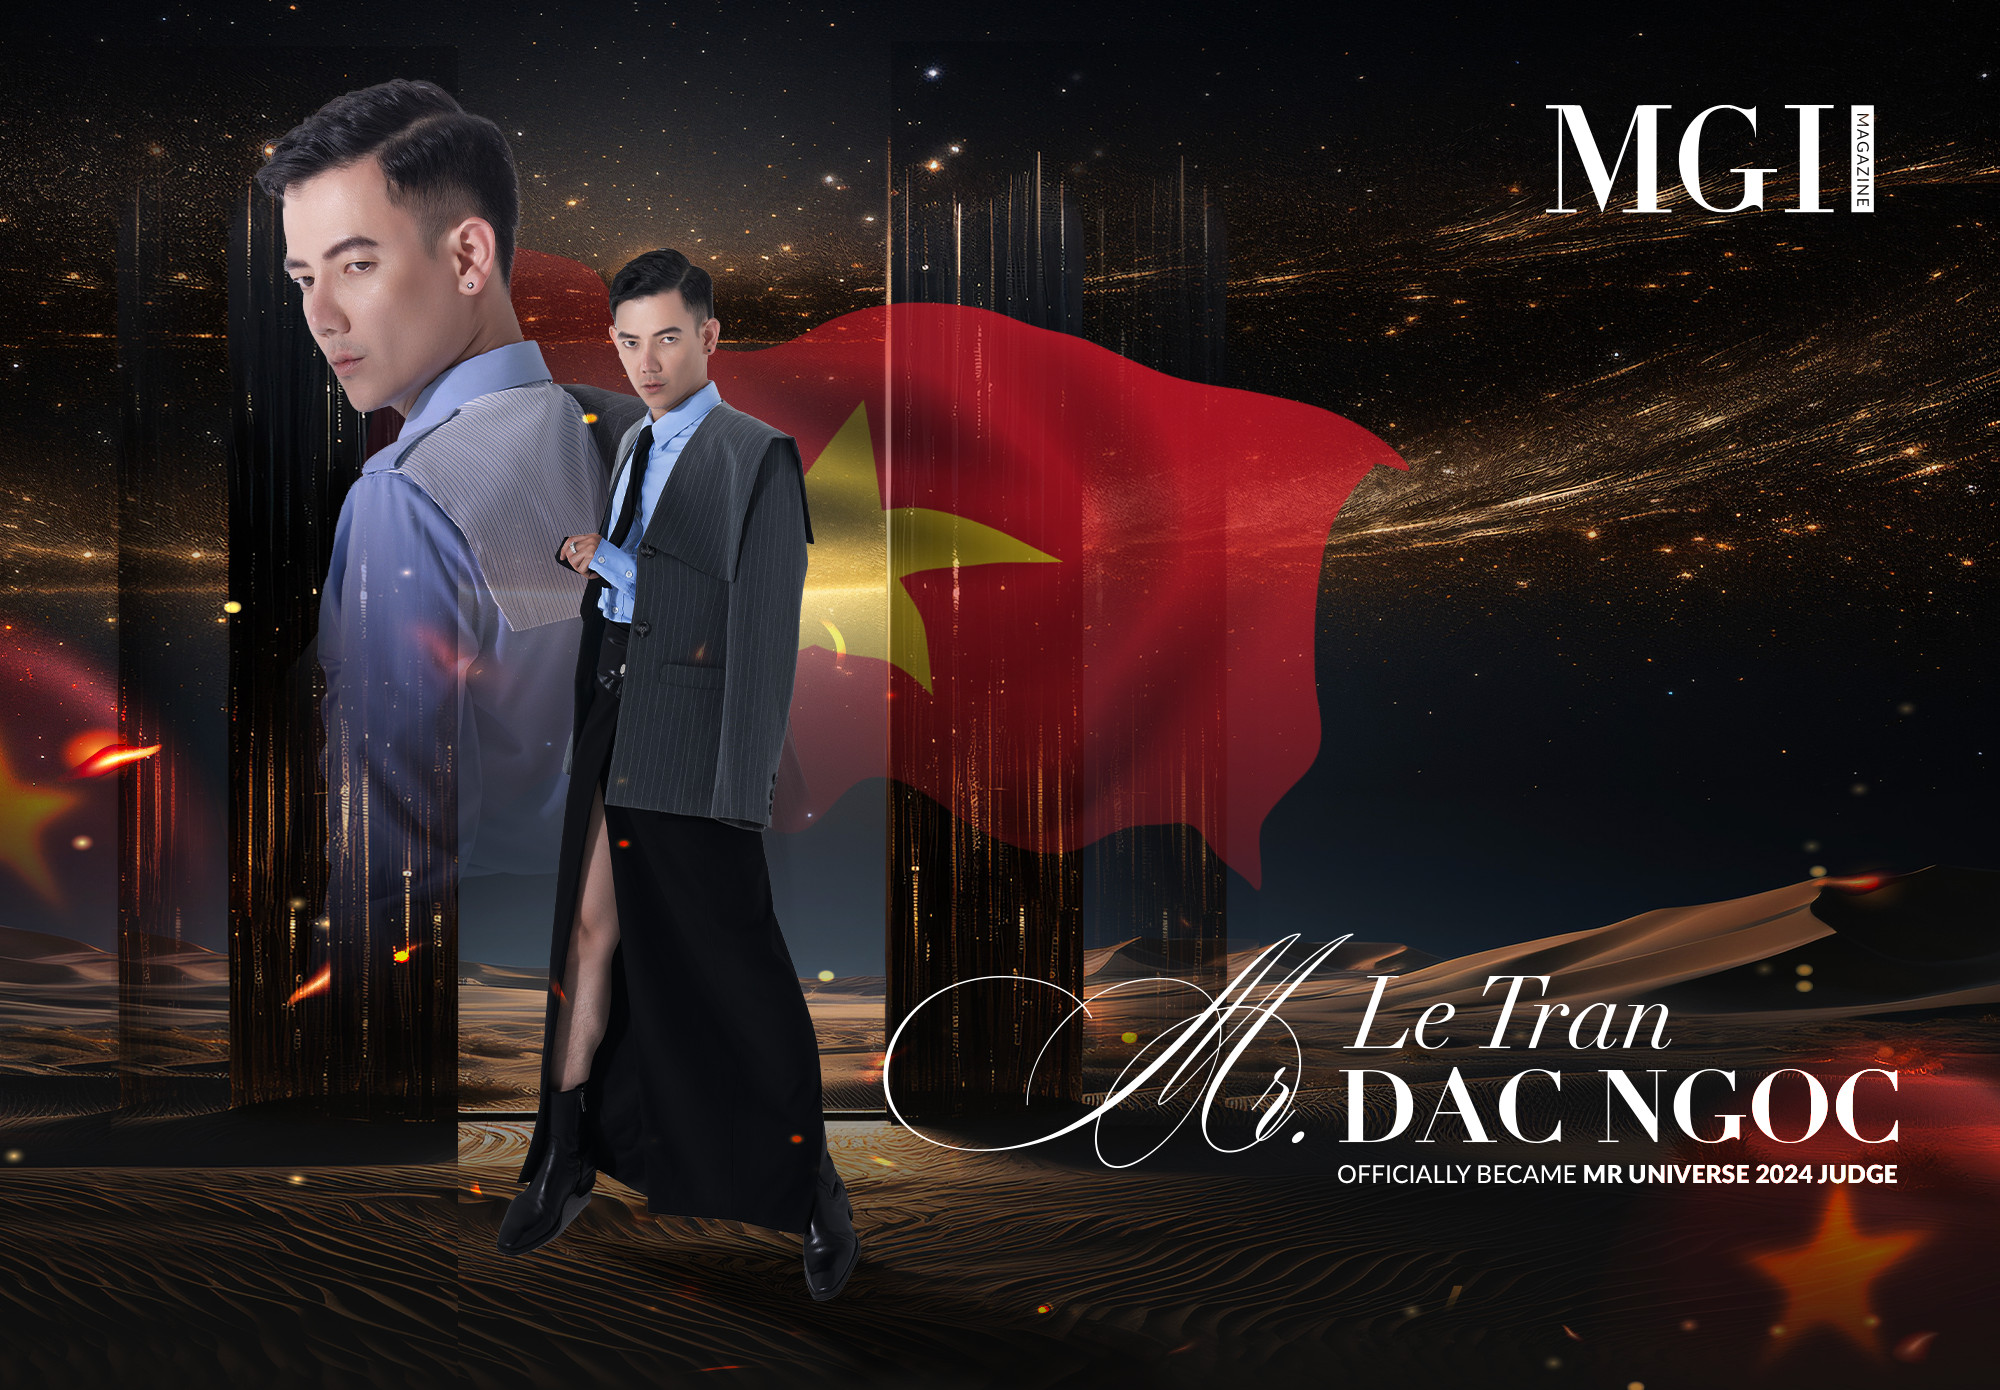 Mr. Le Tran Dac Ngoc officially became Mr Universe 2024 judge